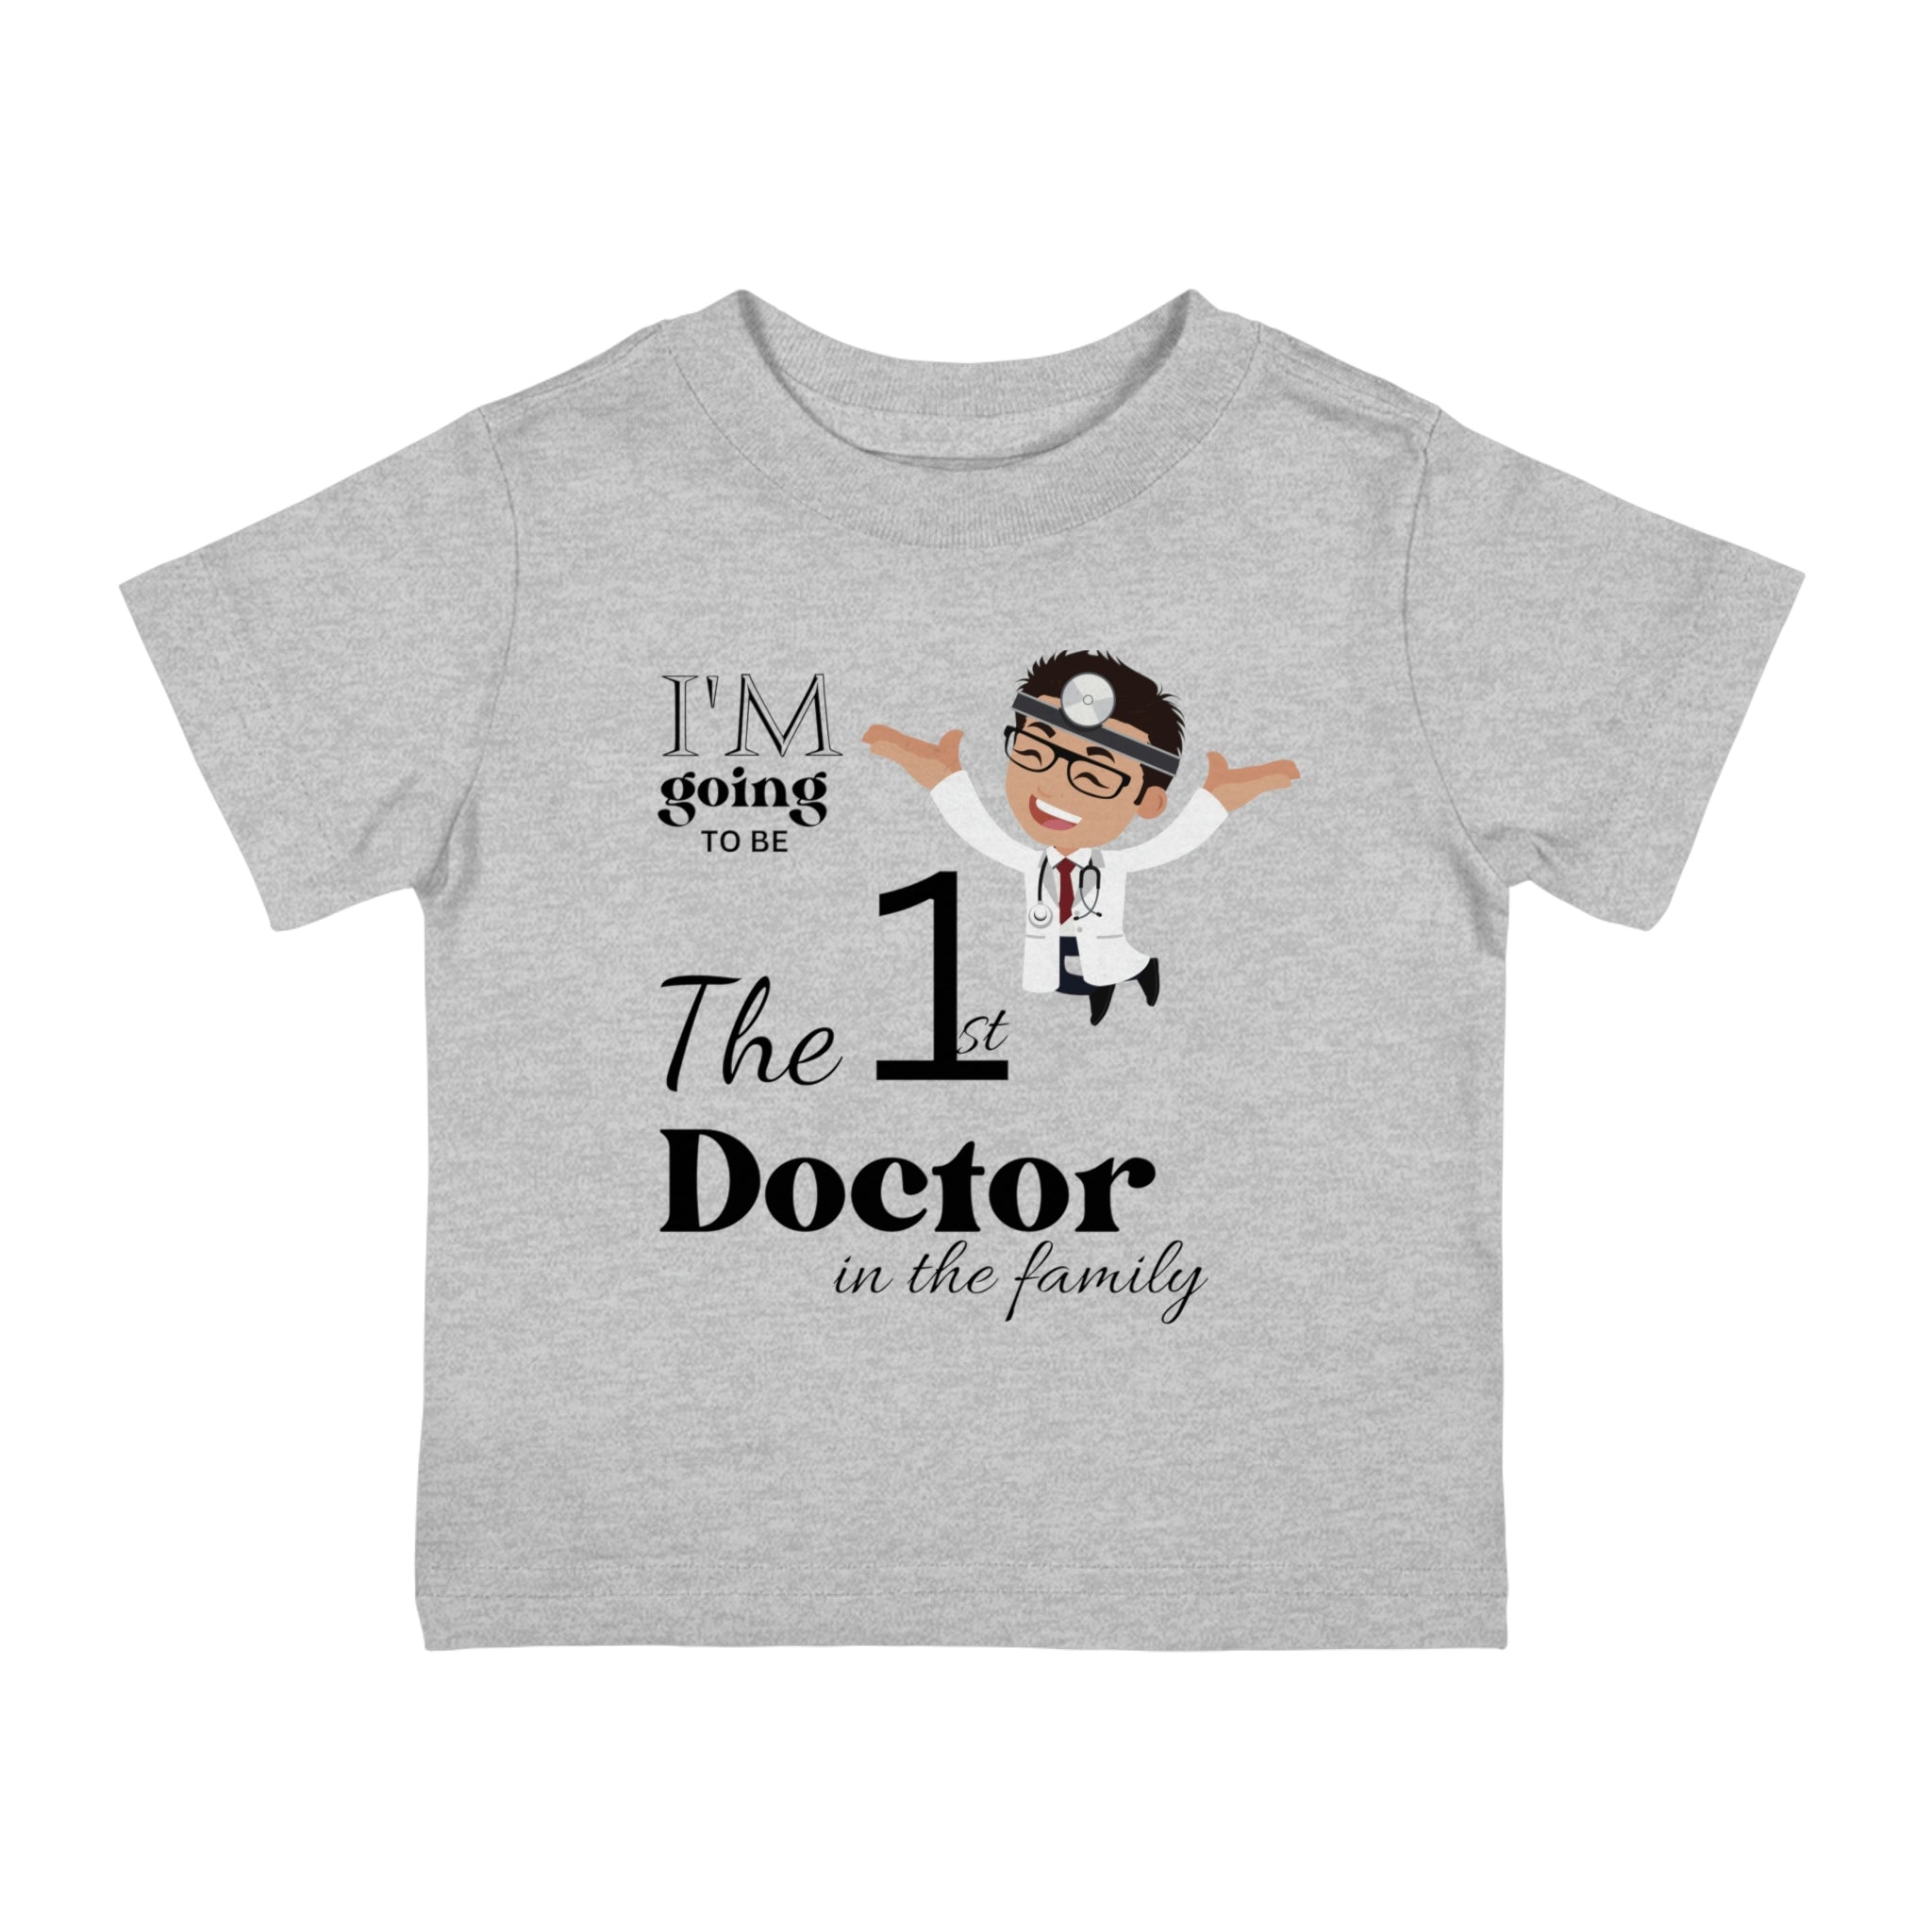 I'm Going To Be The 1st Doctor In The Family Infant Shirt, Baby Tee, Infant Tee